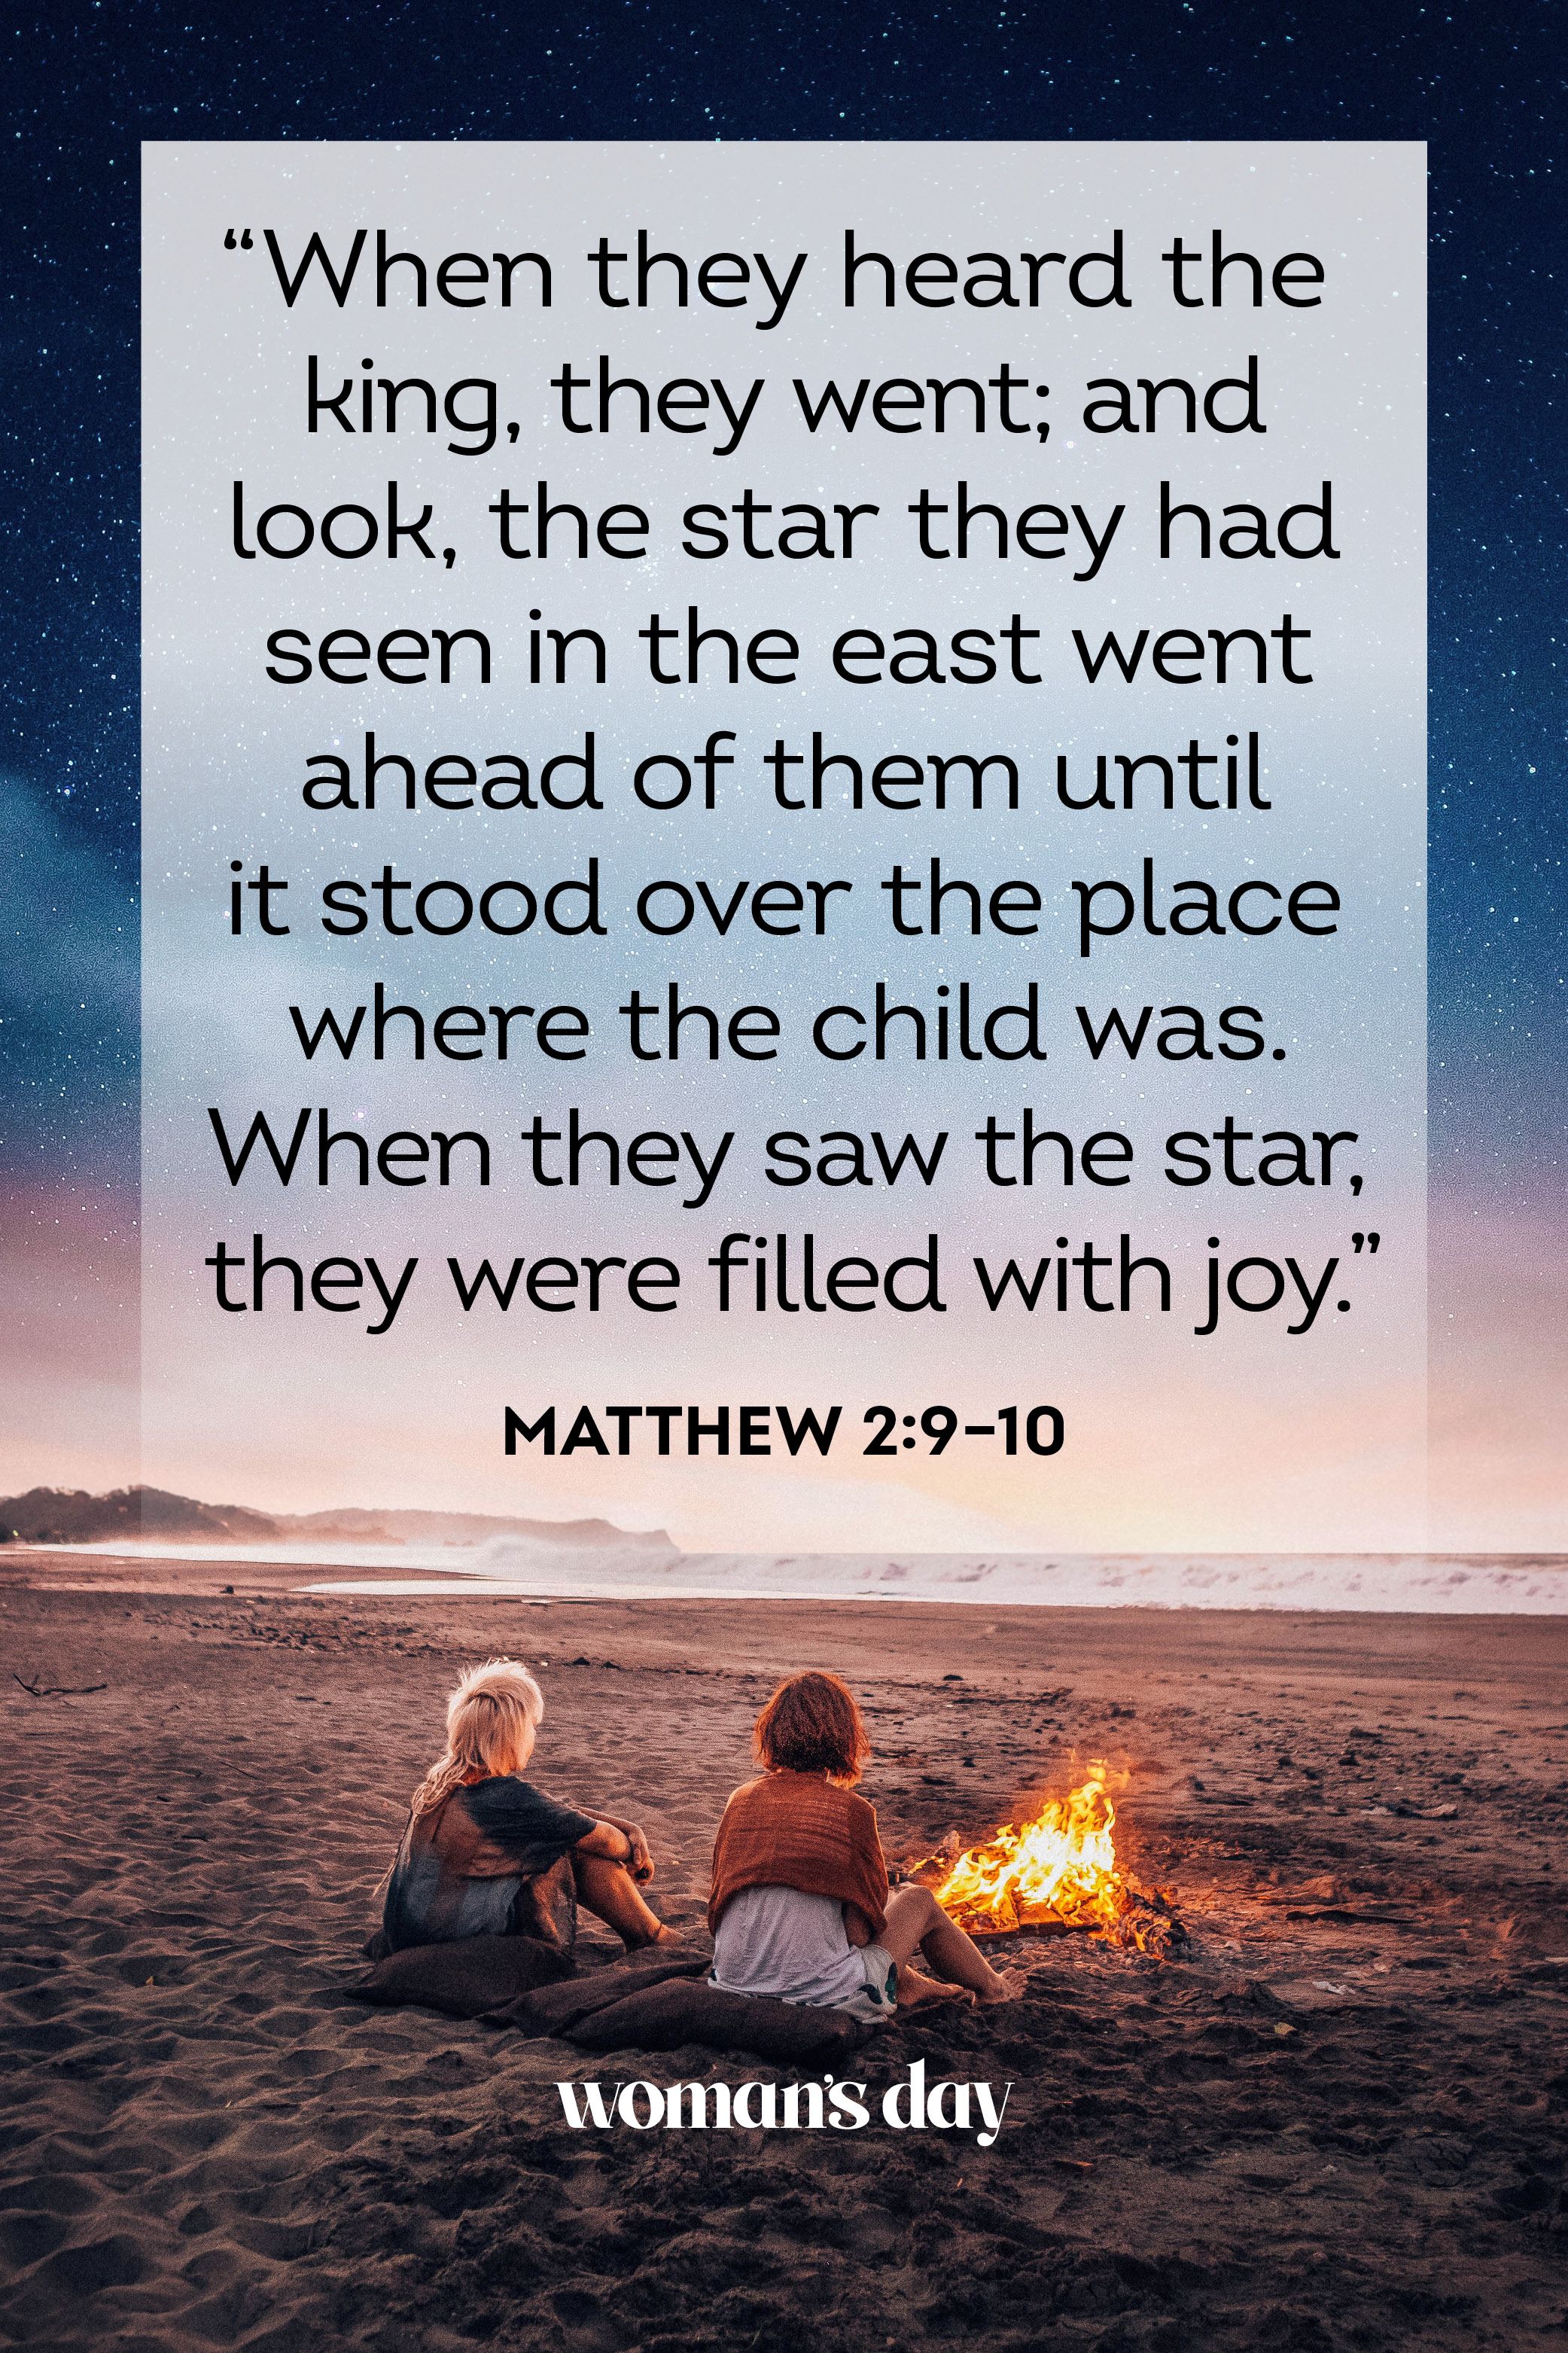 Joy to the World, the Lord Has Come: 25 Verses About Joy